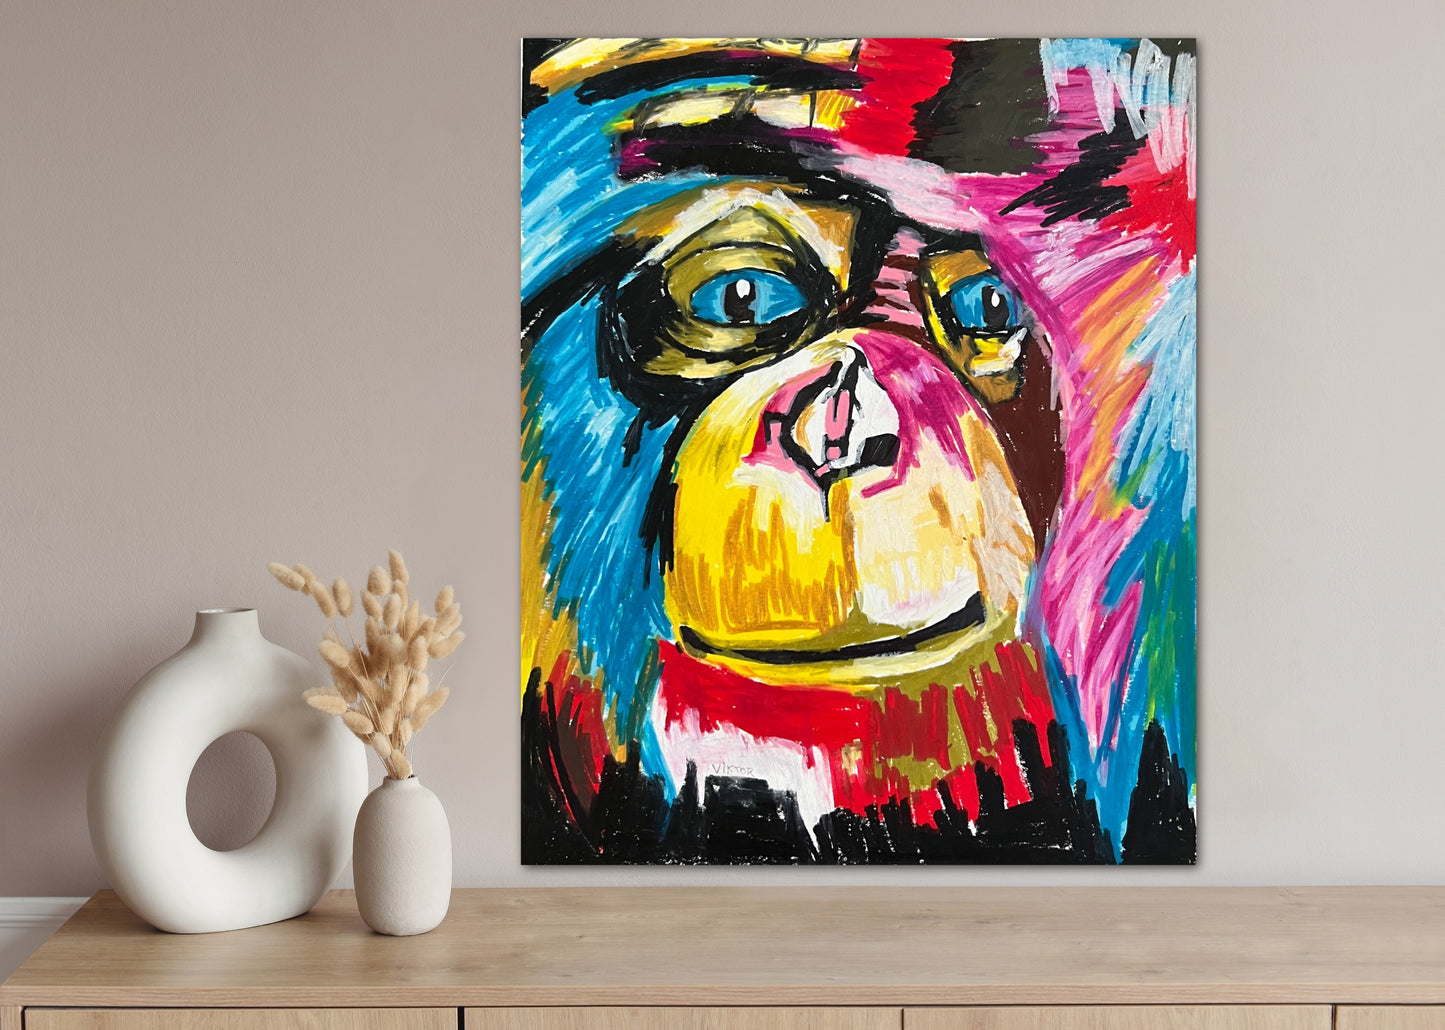 Monkey Collection: Monkey 1 - fine prints and canvas prints in more size